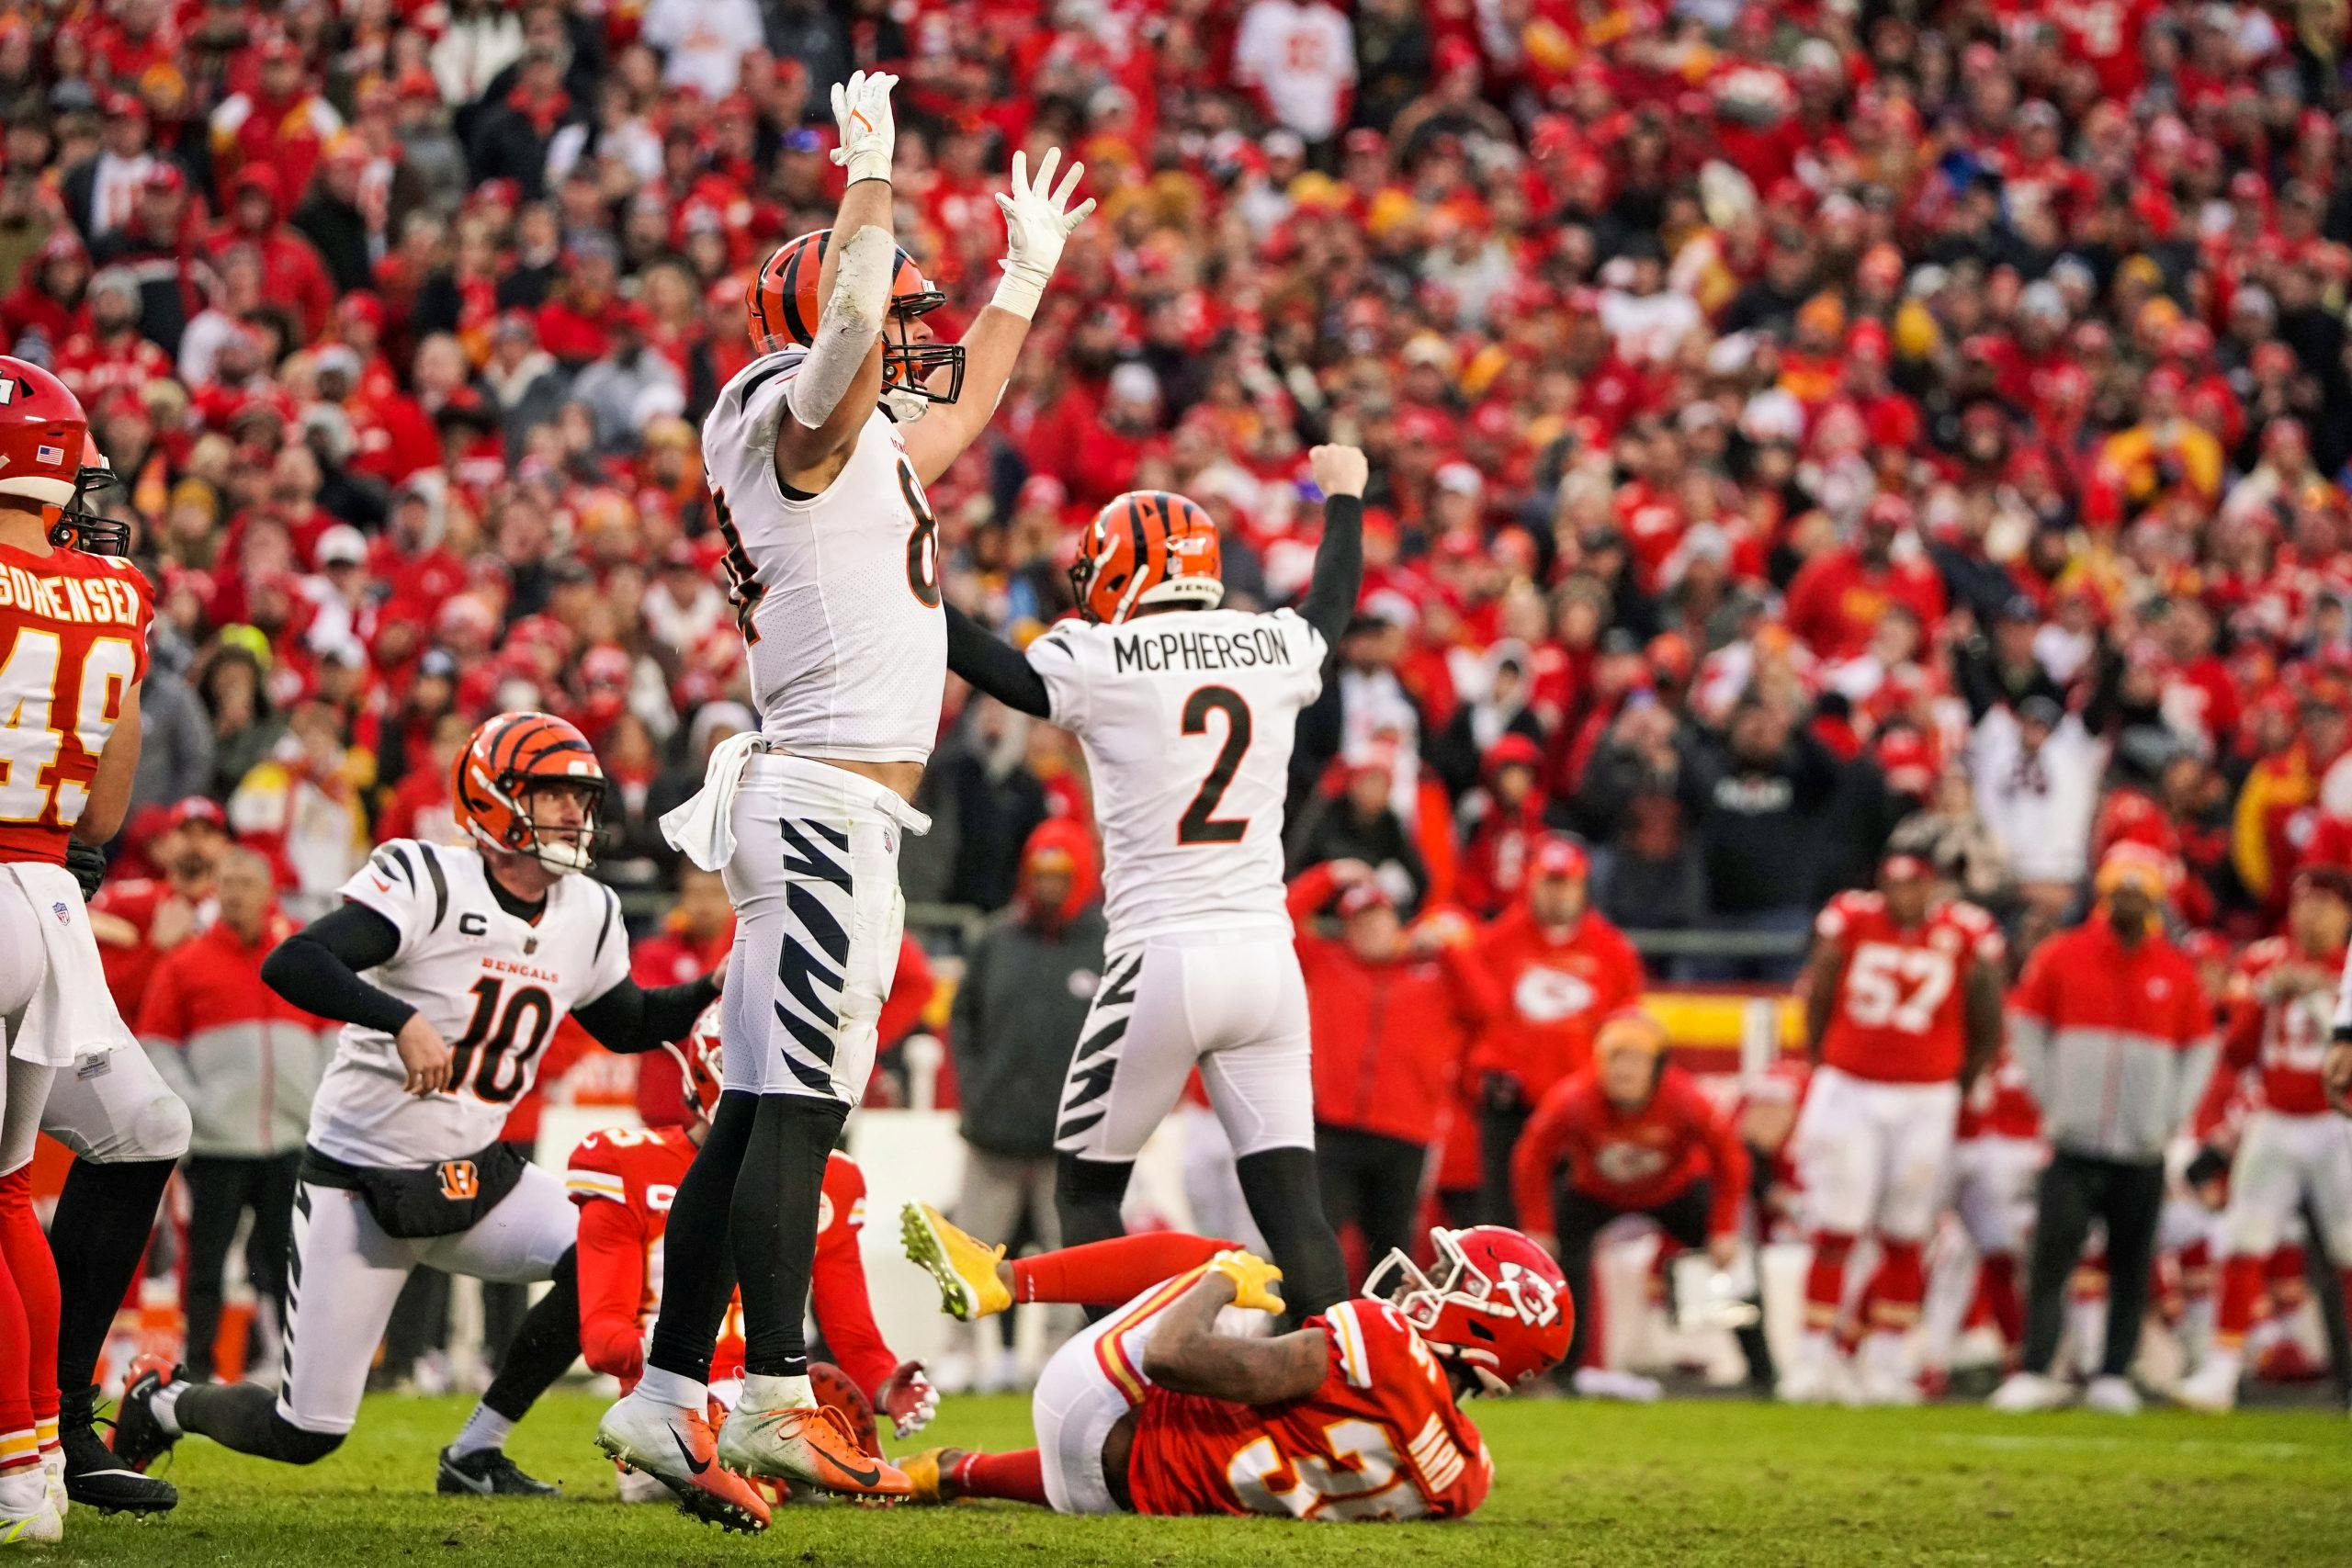 In an incredible overtime win, the Kansas City Chiefs stun the